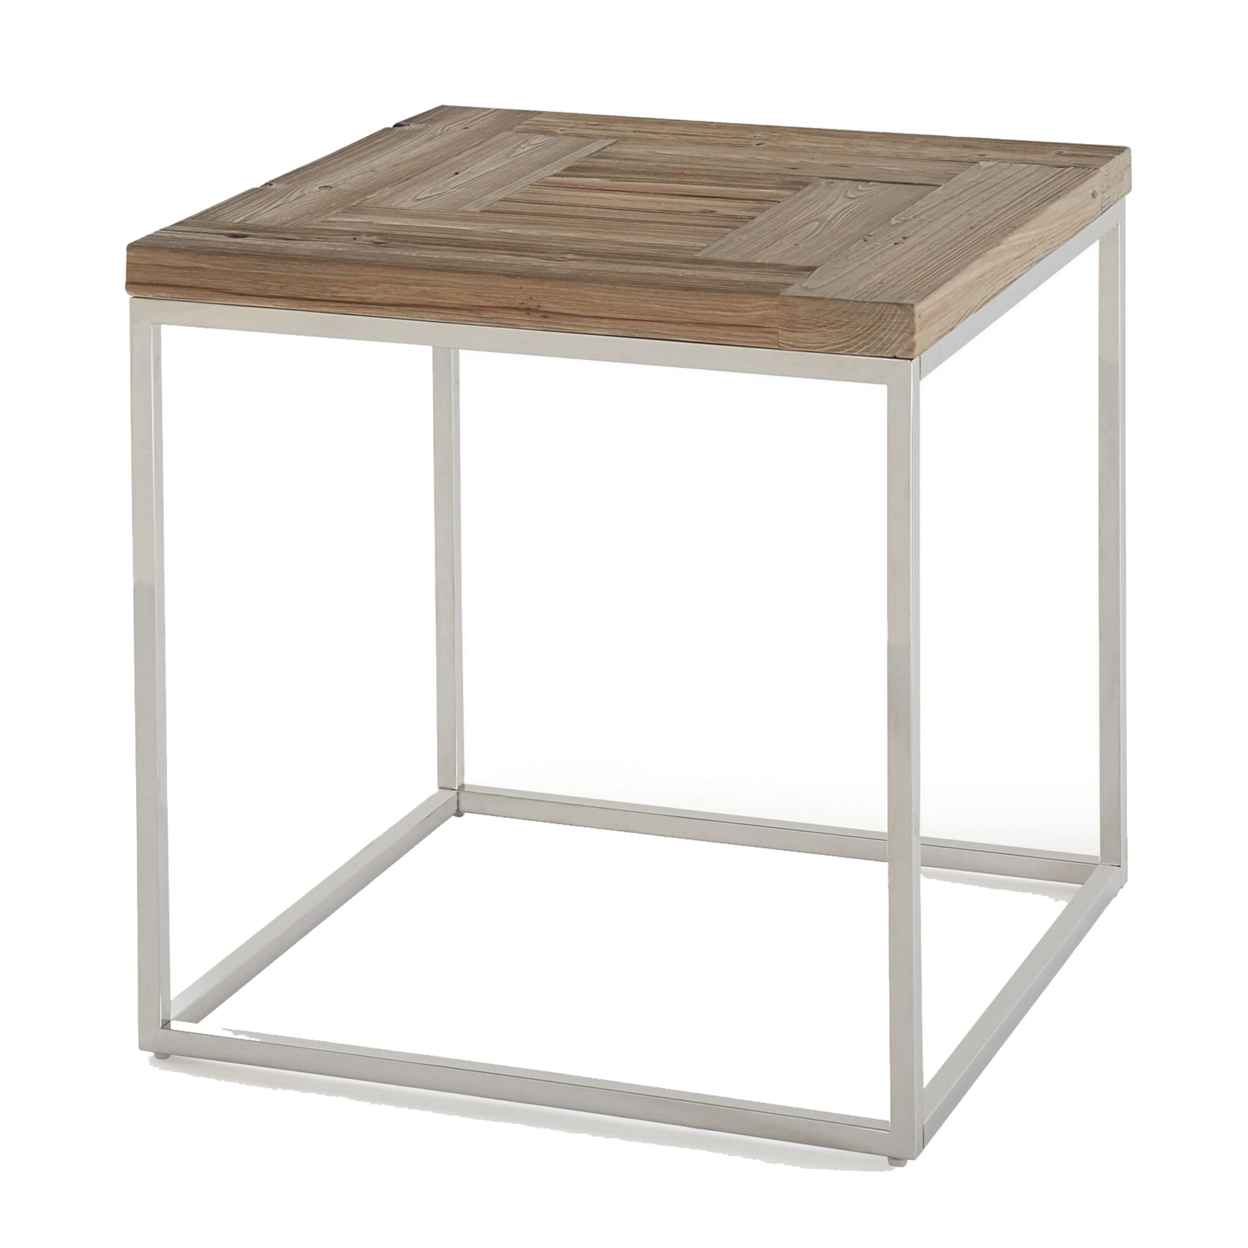 24 Inches Wooden Top End Table With Metal Base, Brown And Silver- Saltoro Sherpi